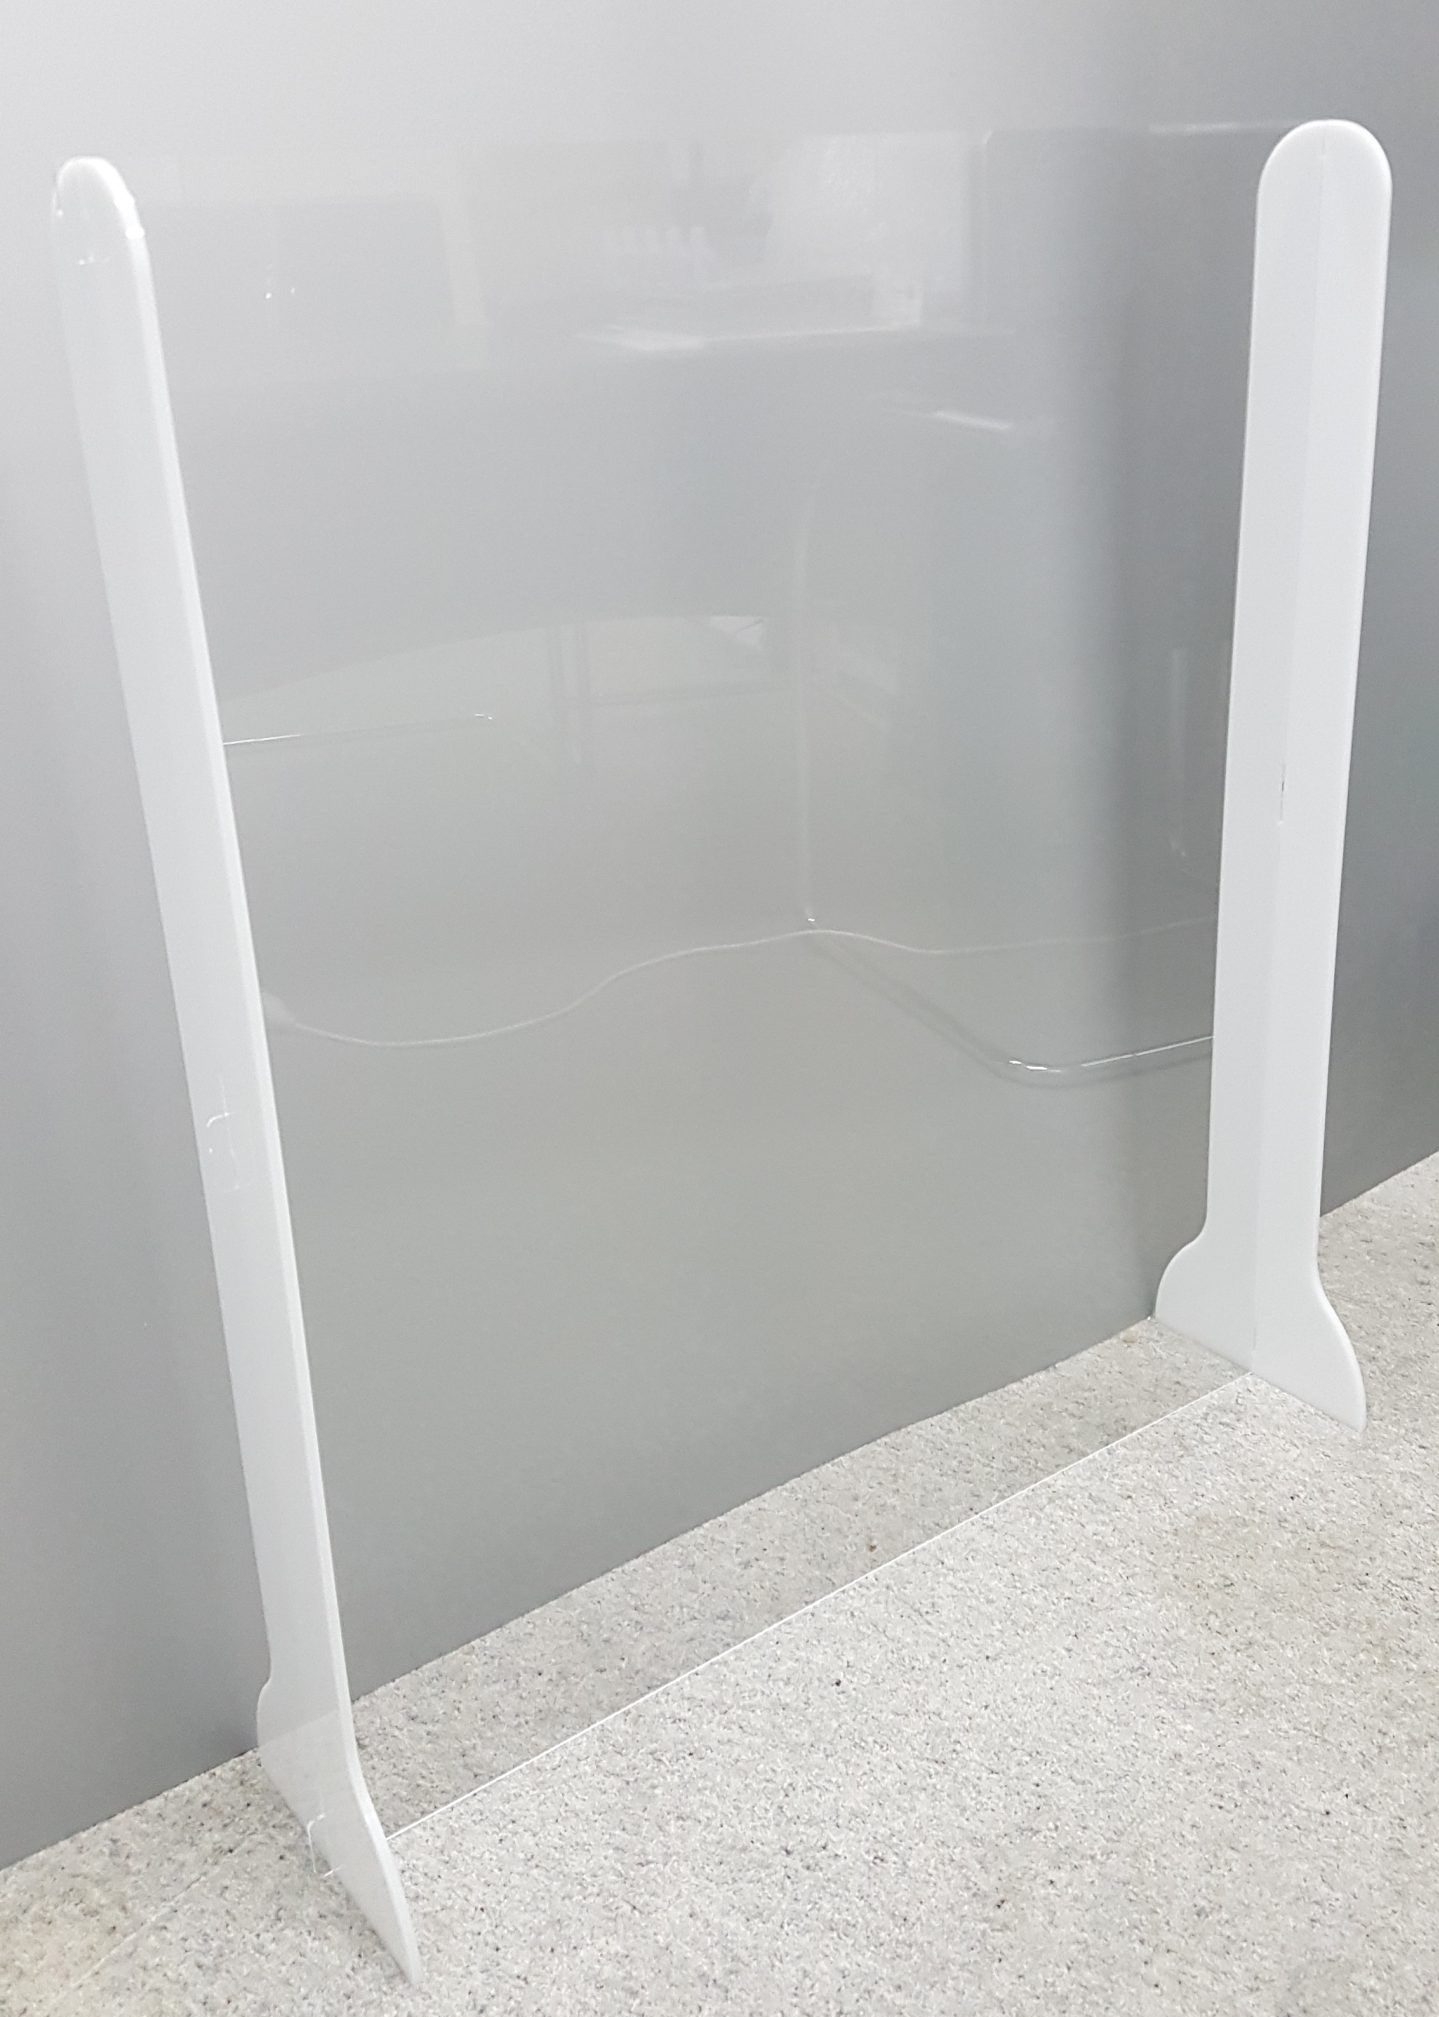 Standard free-standing sneeze guard manufactured from 3mm clear acrylic and 6mm opal acrylic